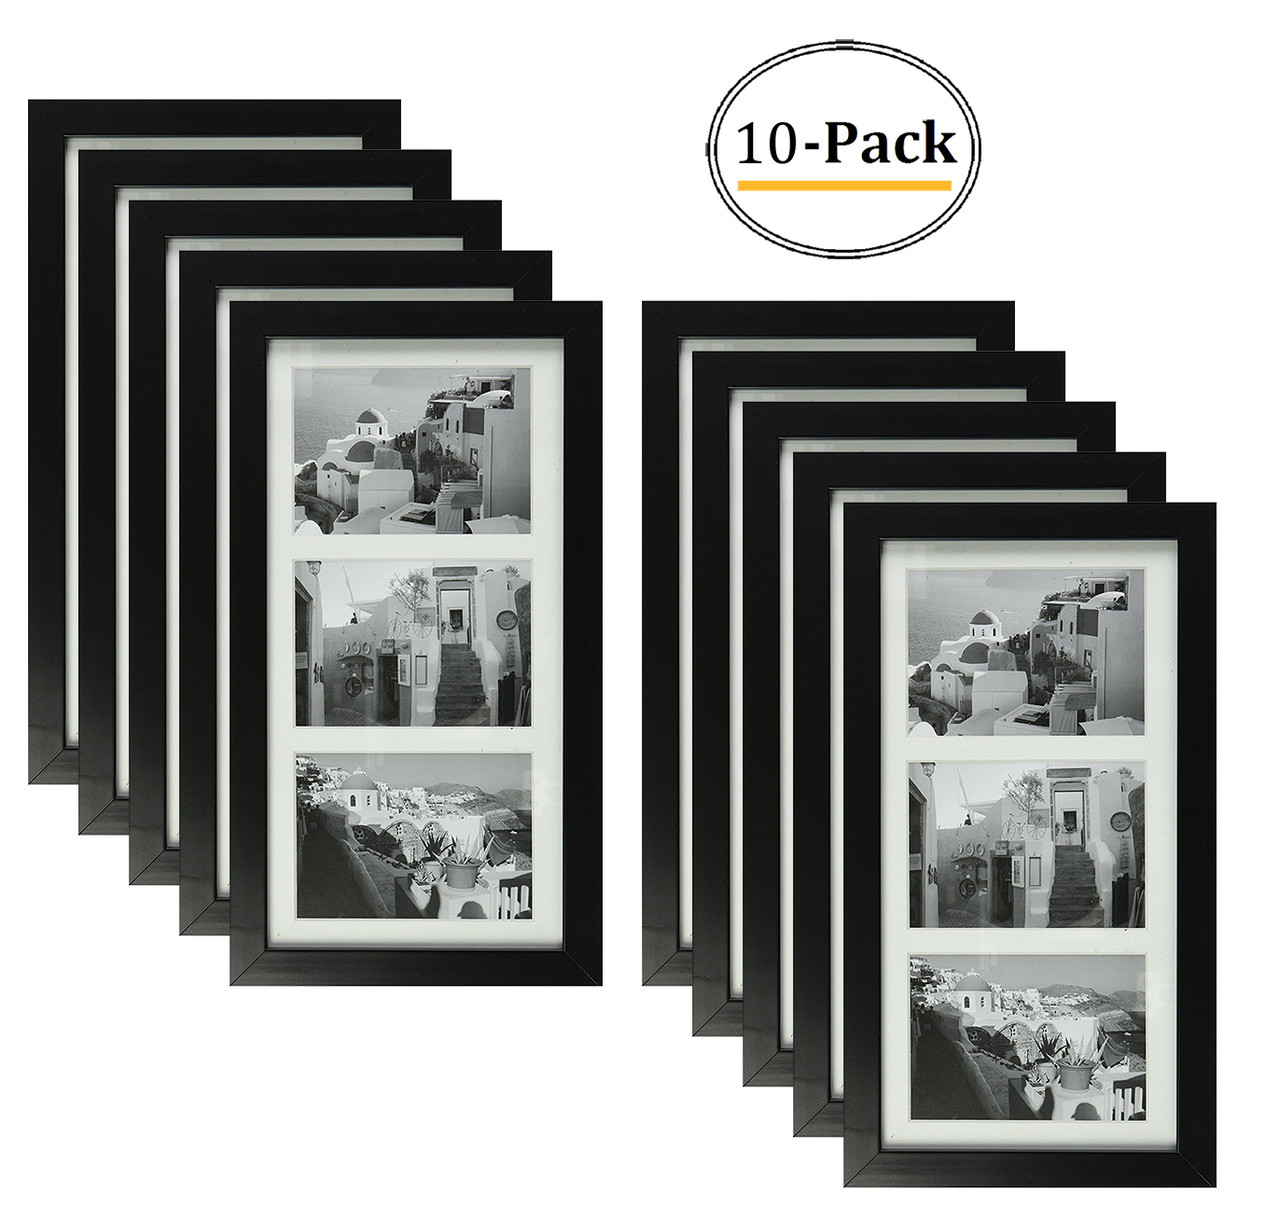 Black and White 4x6 Collage Frame - Holds 4 4x6 Photos (2 Pack)